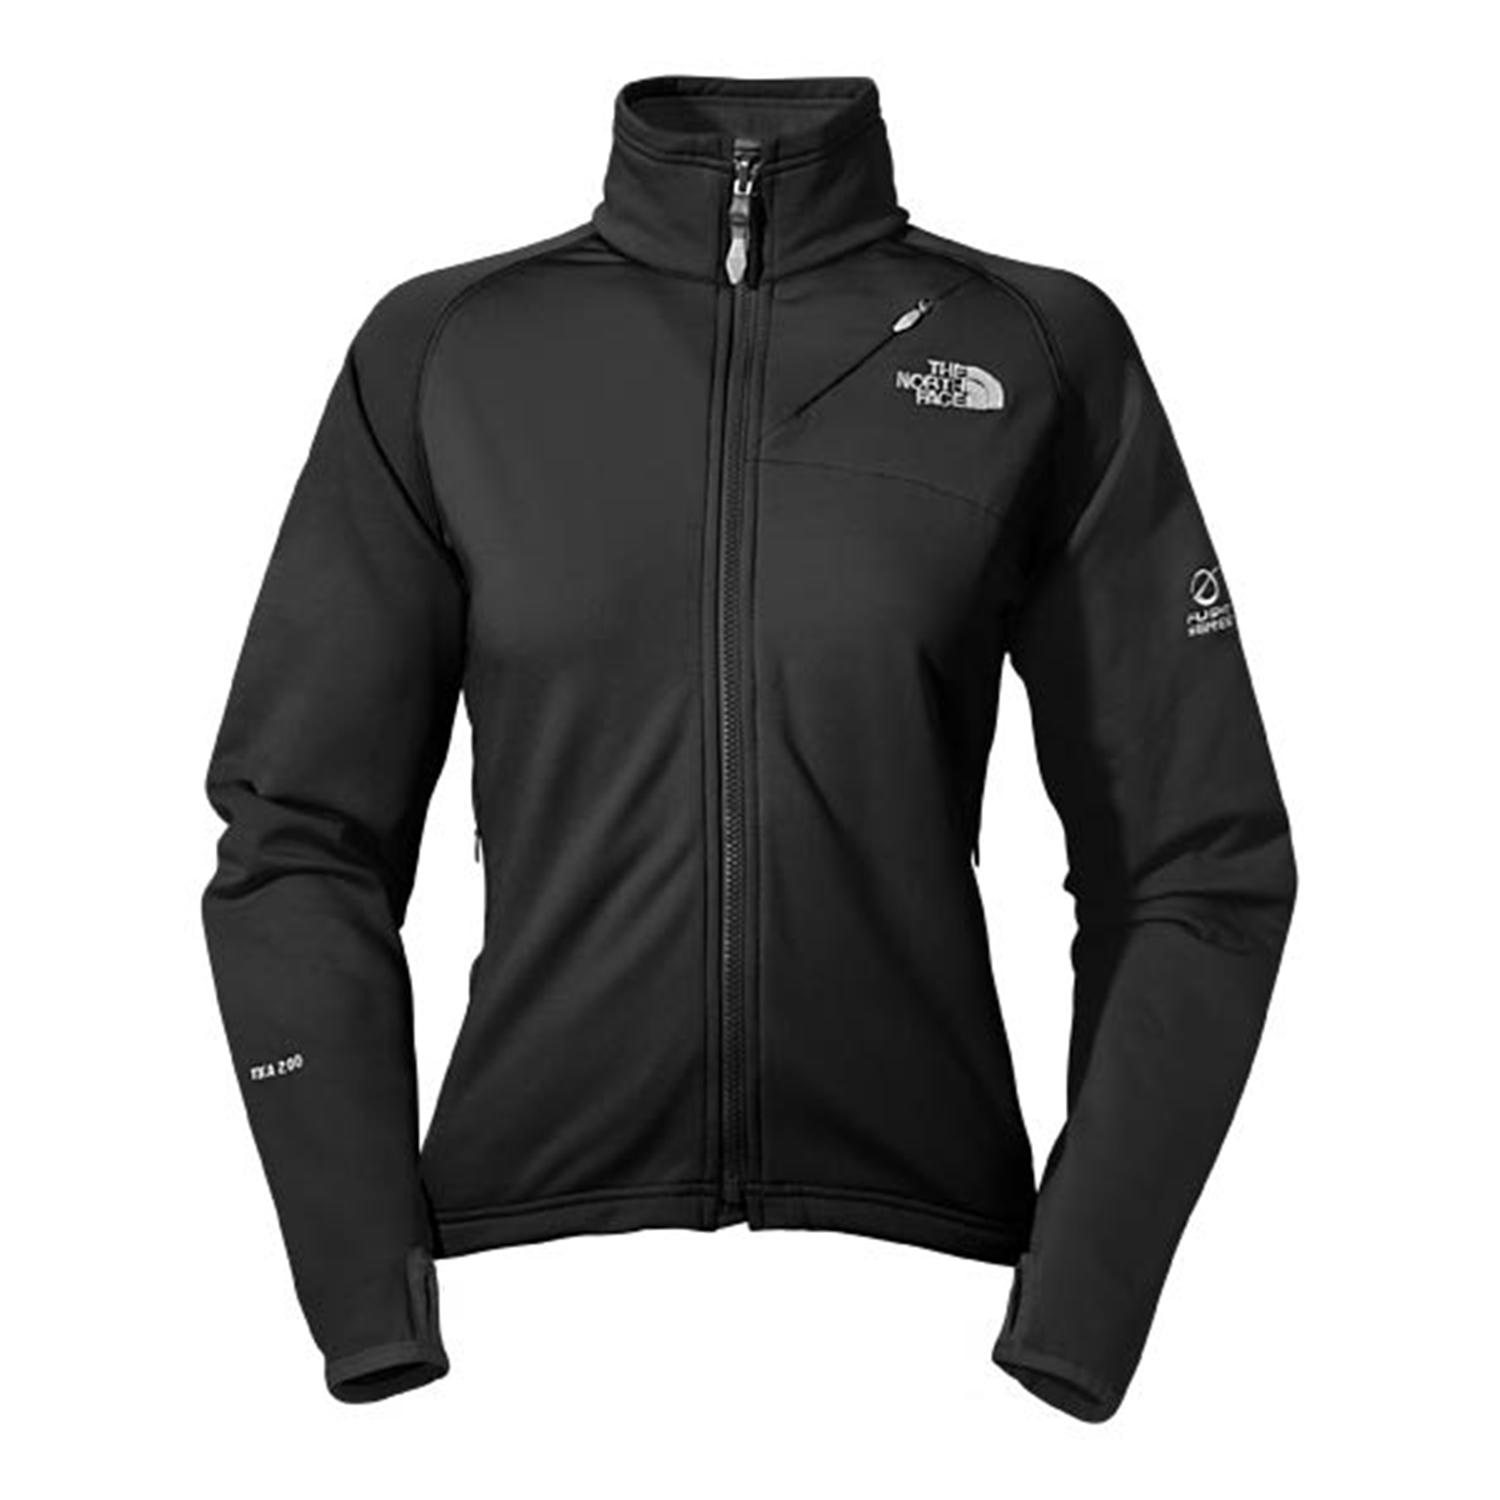 The North Face Momentum Jacket - Women's | evo outlet